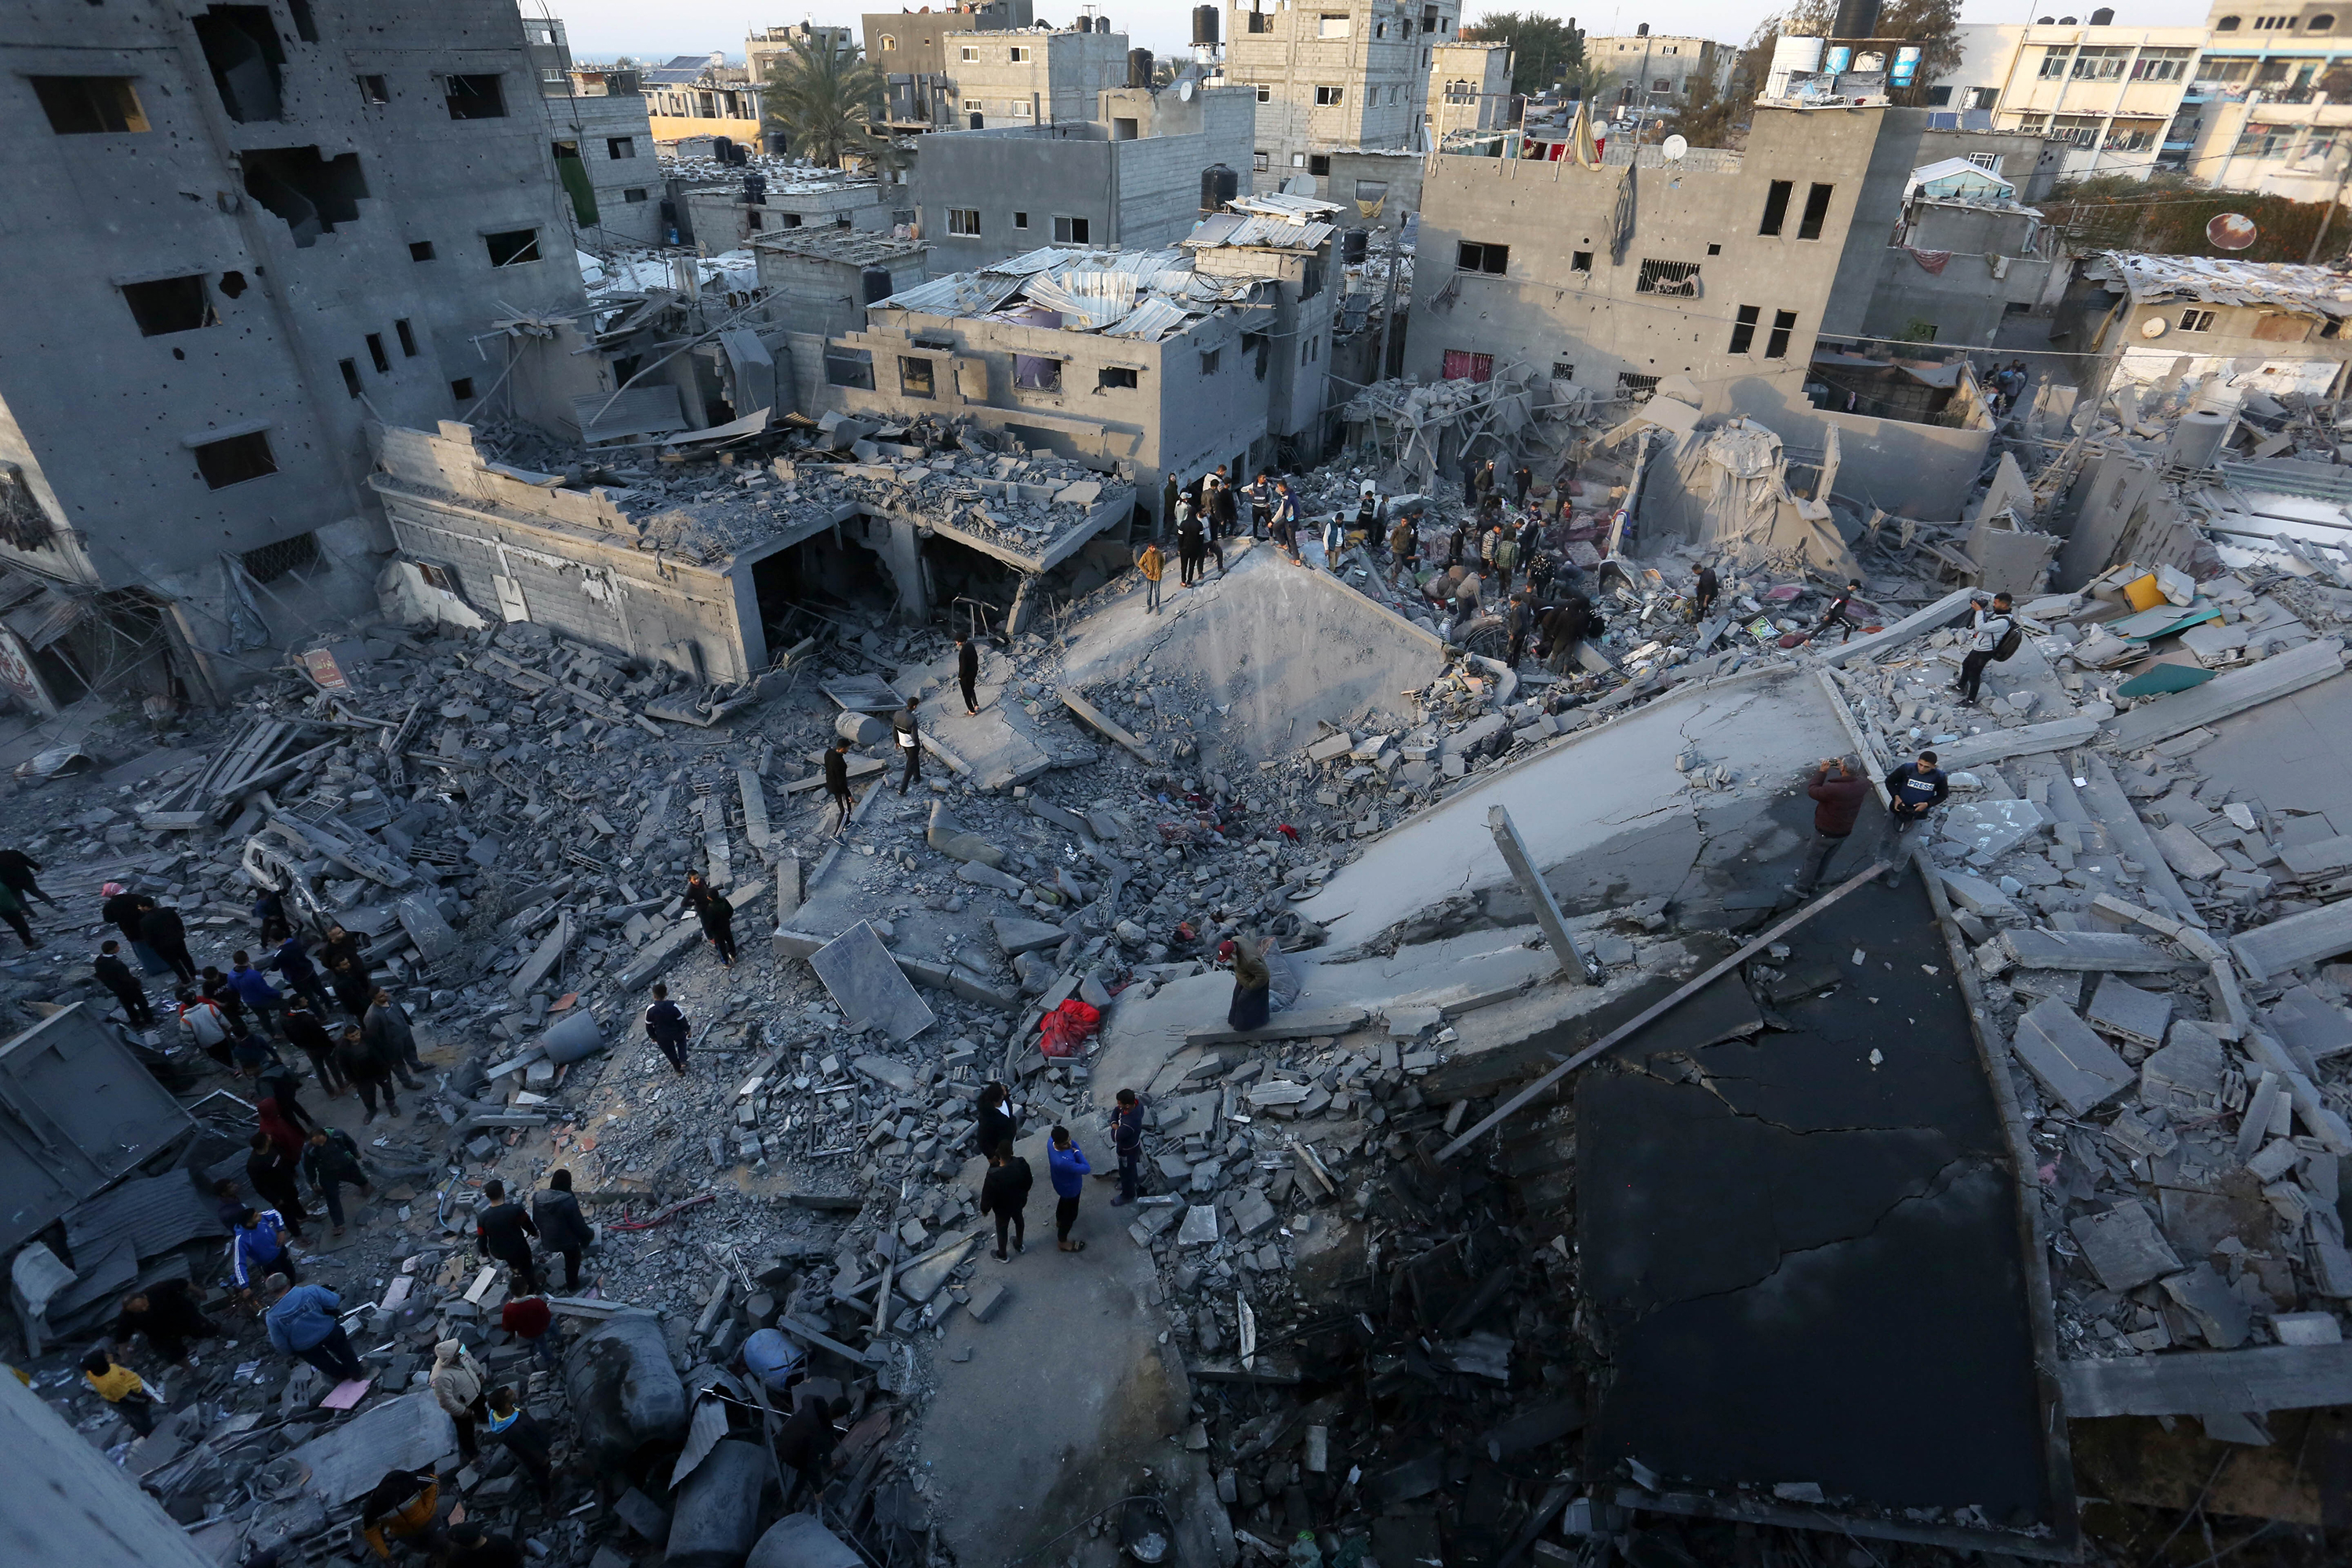 Residents conduct a search and rescue operation in the rubble of destroyed buildings after Israeli attacks at al-Nuseirat refugee camp in Deir al-Balah, Gaza on February 28.